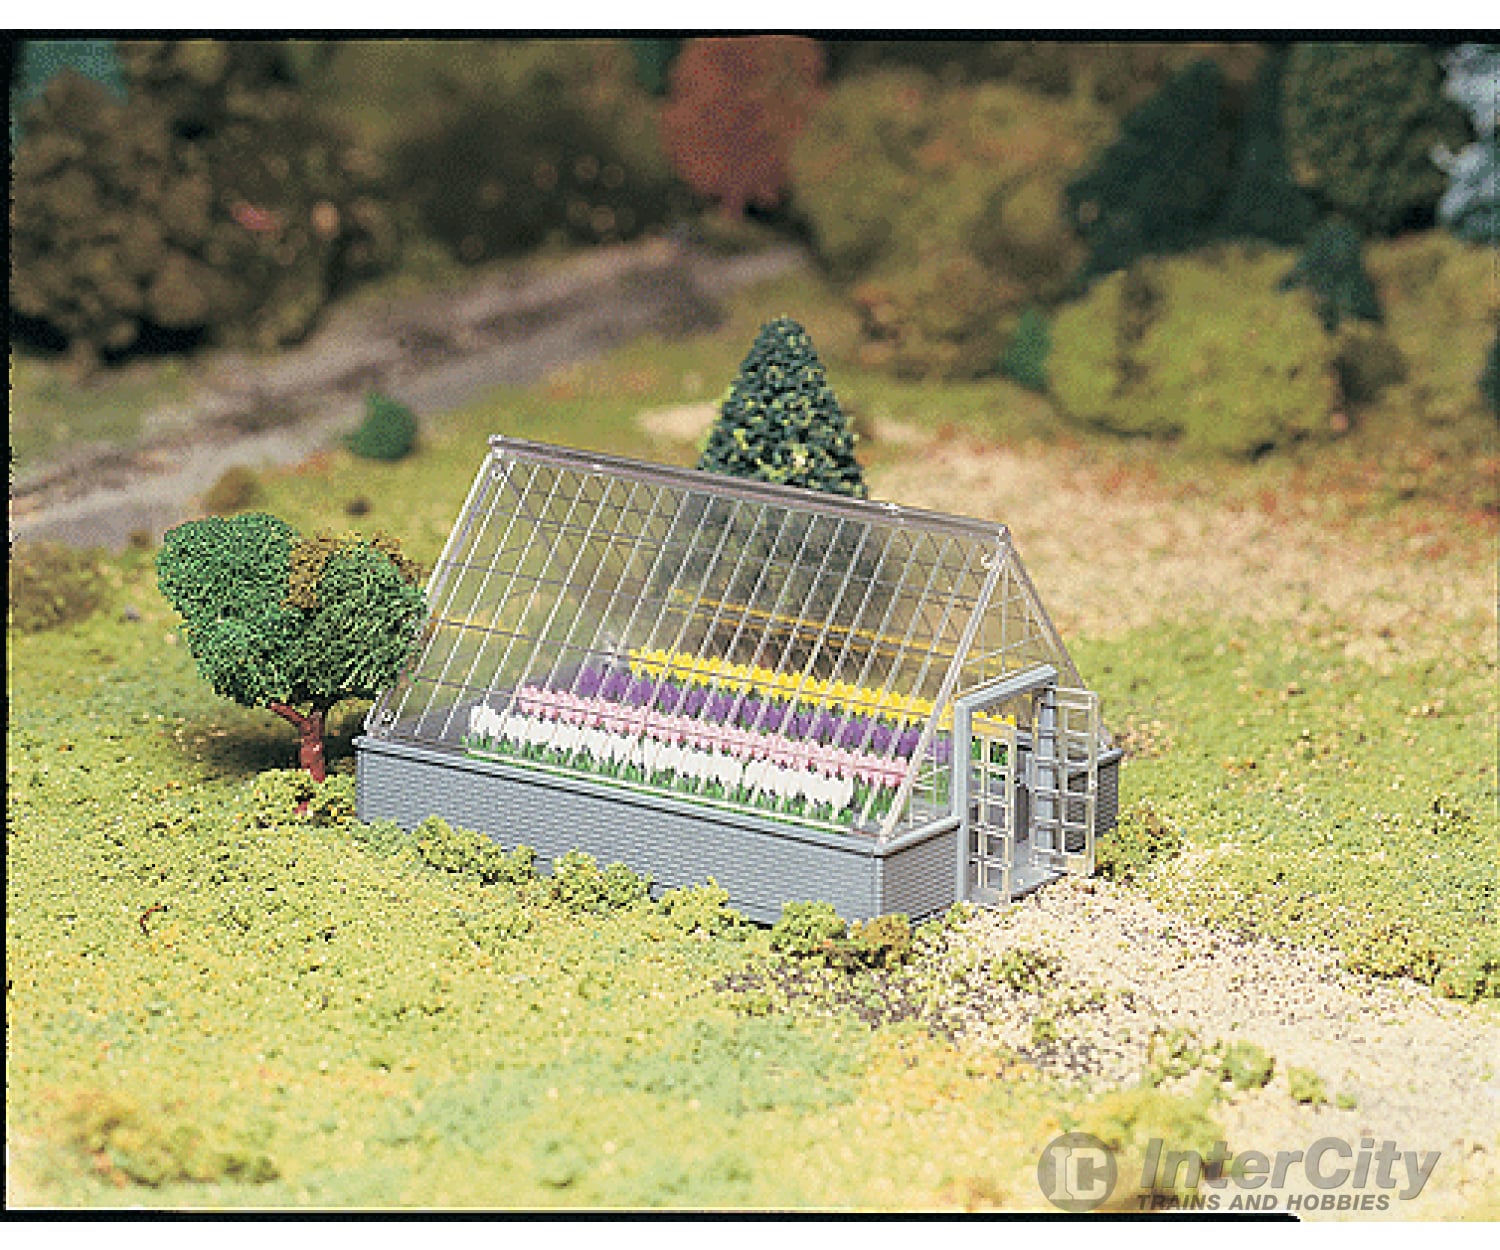 Bachmann 45615 Plasticville U.s.a.(R) Classic Kits -- Greenhouse W/Flowers Structures